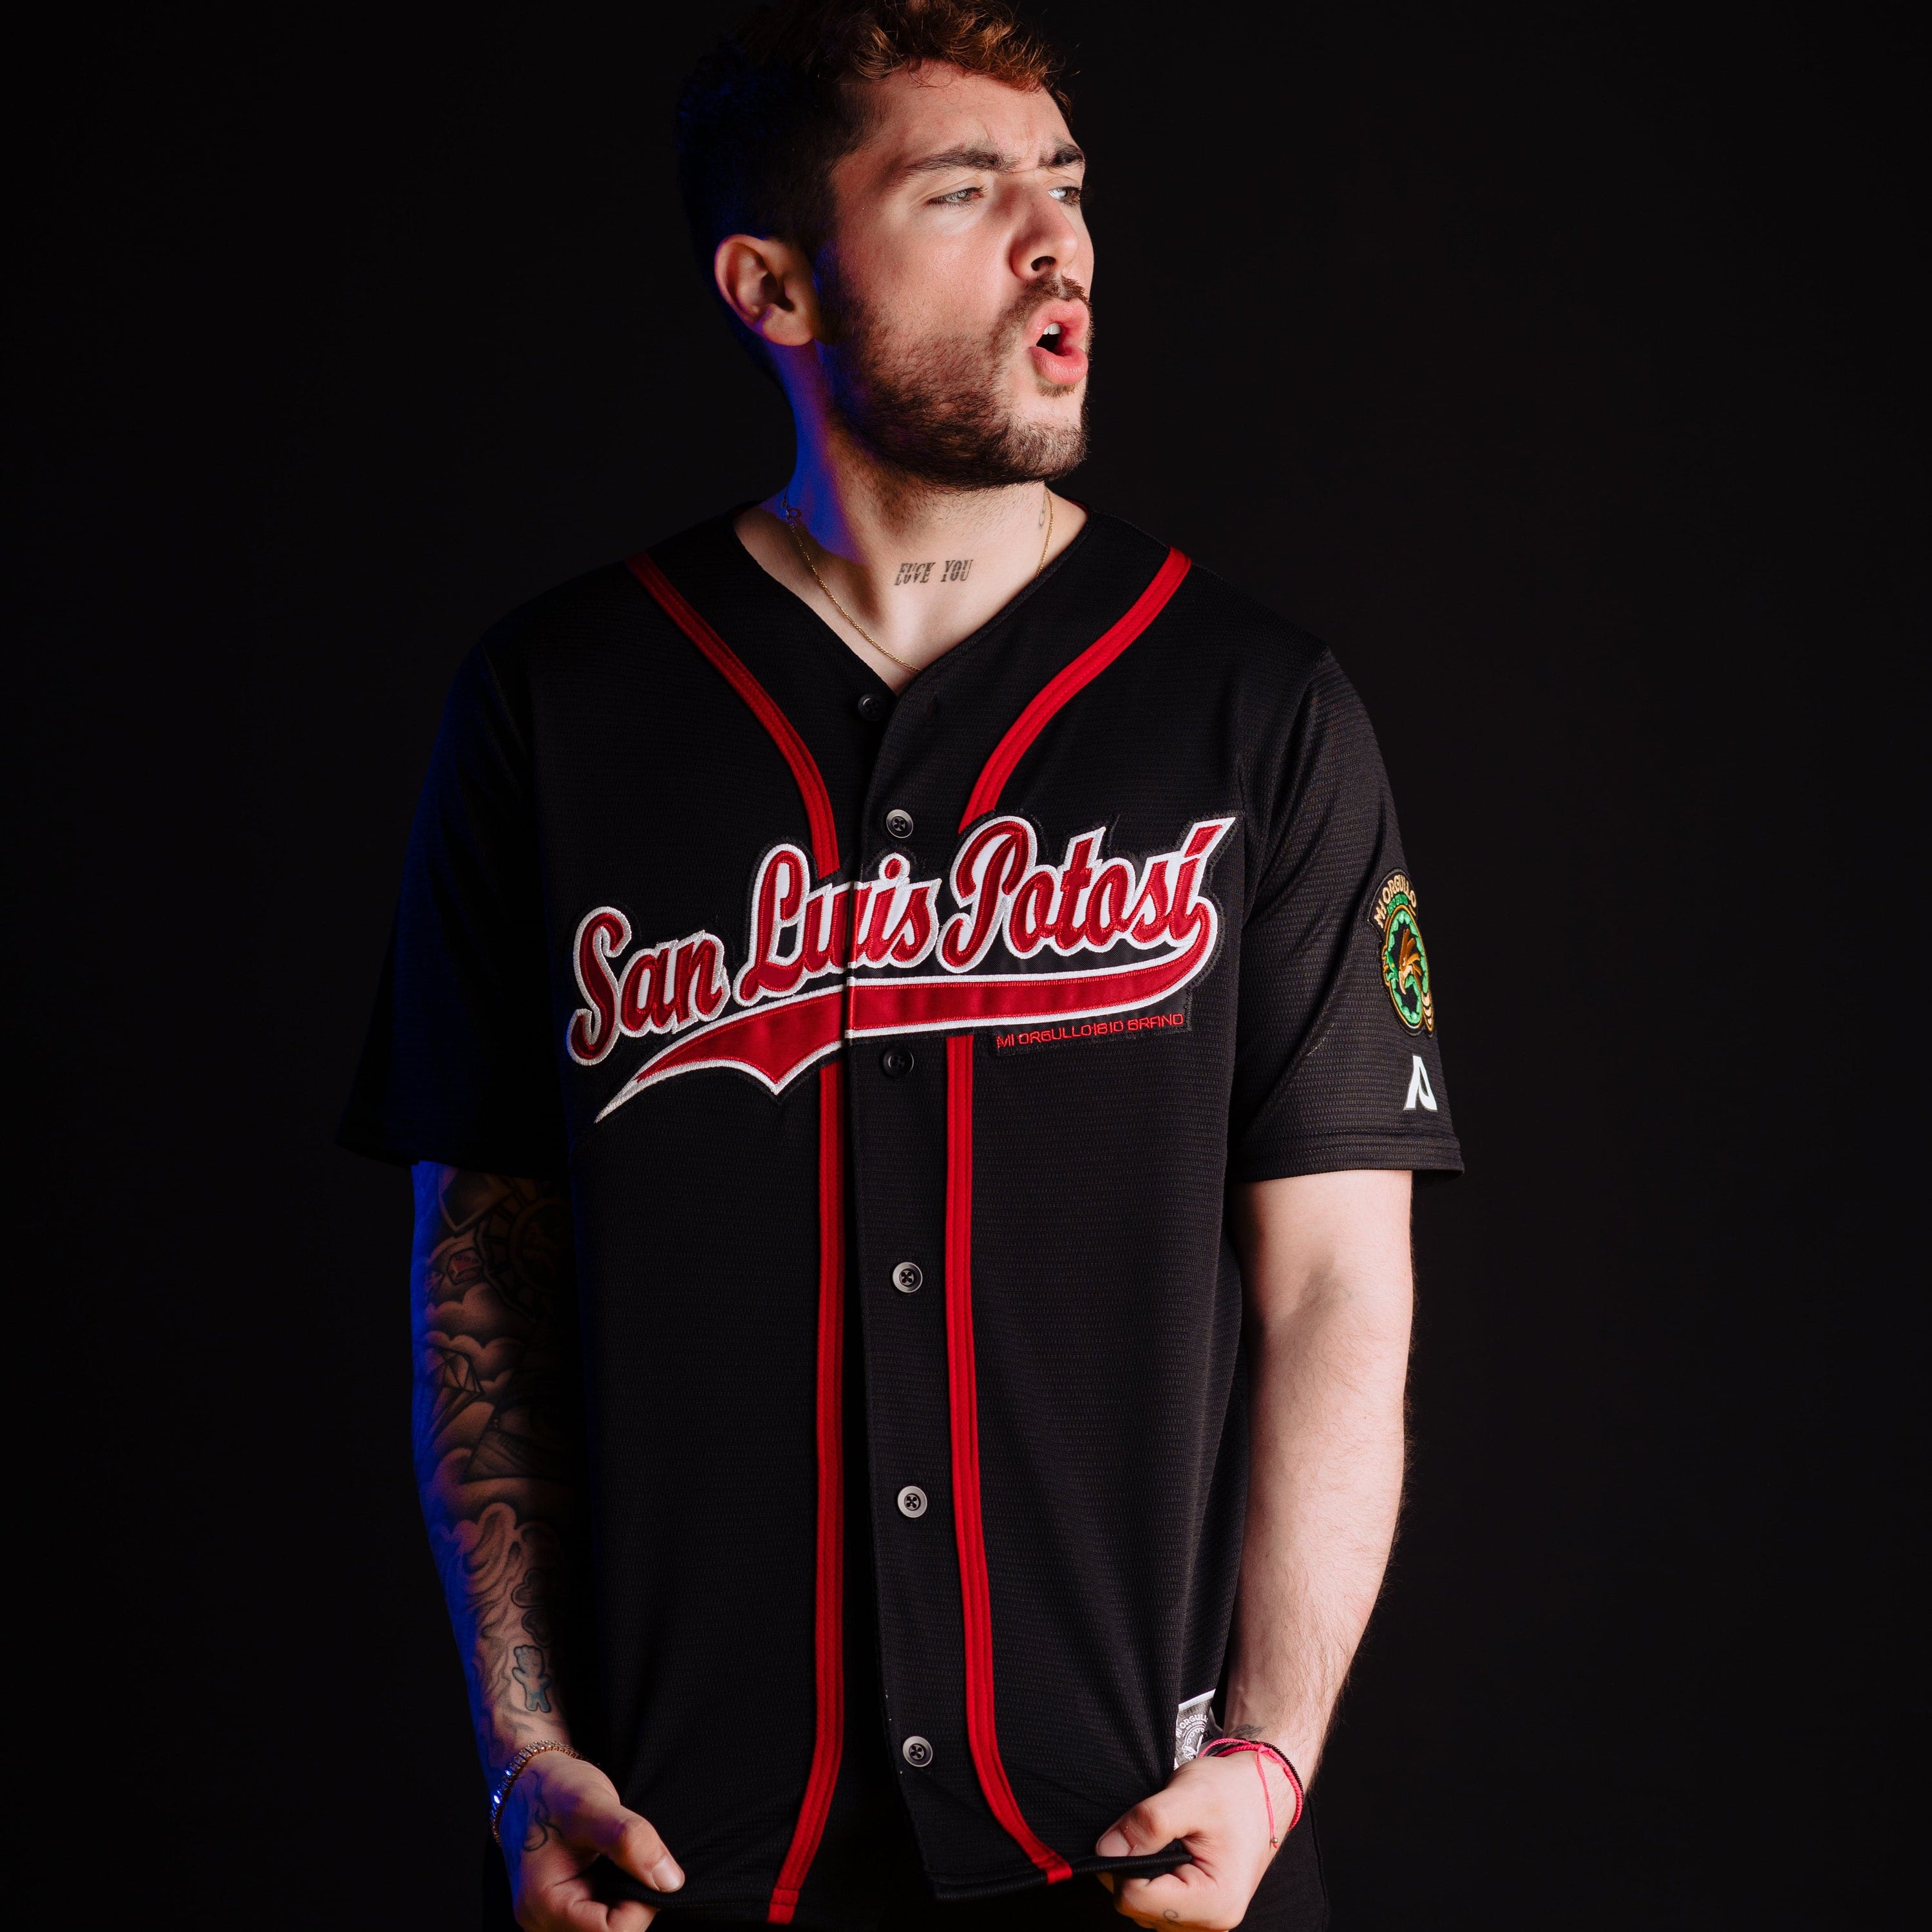 The new San Francisco Giants black jerseys are terrible